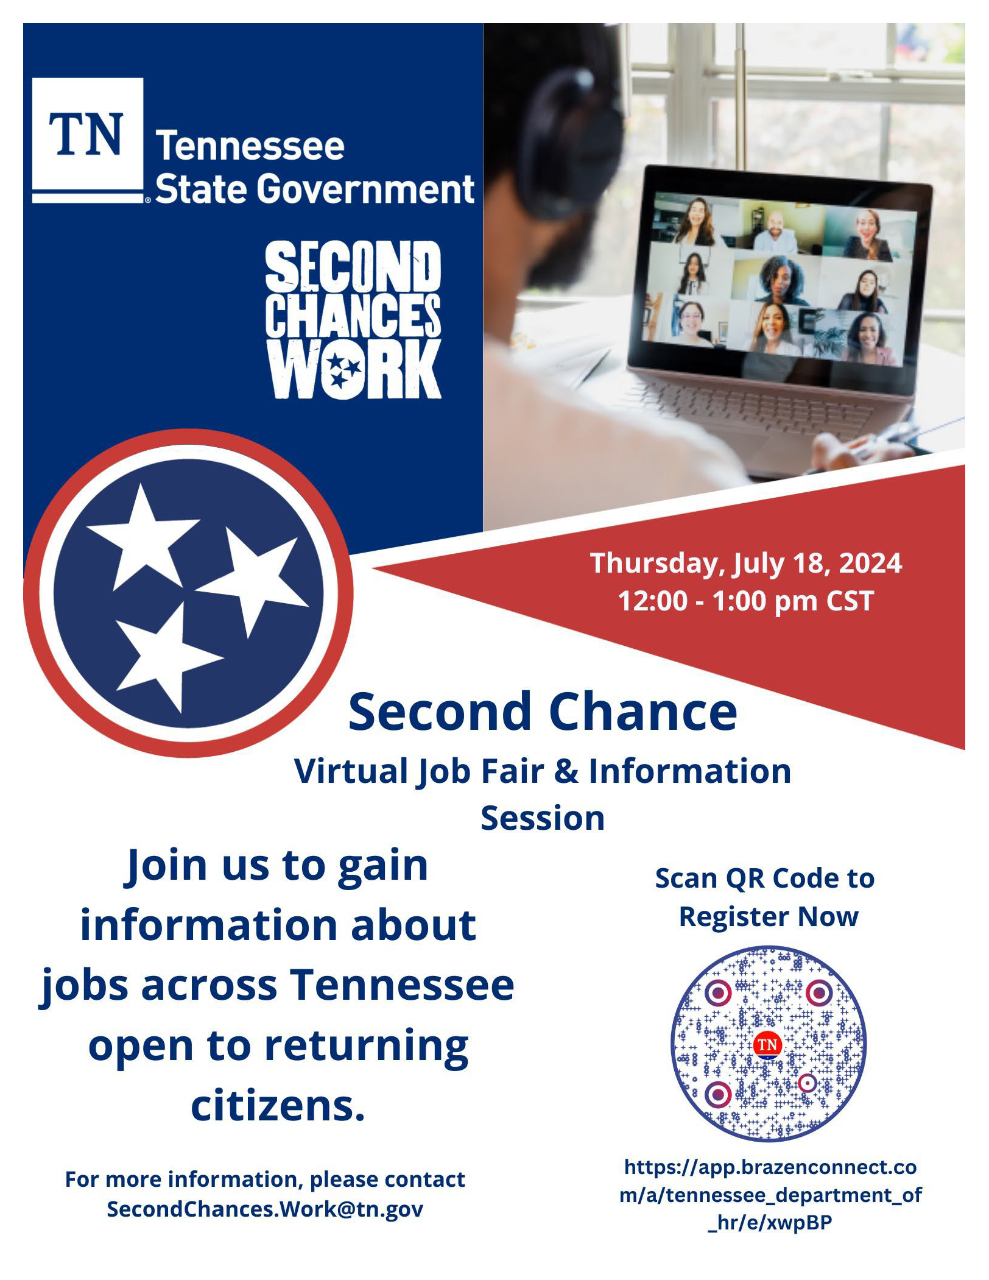 The Second Chance Virtual Job Fair is July 18, 2024, from noon to 1 p.m.